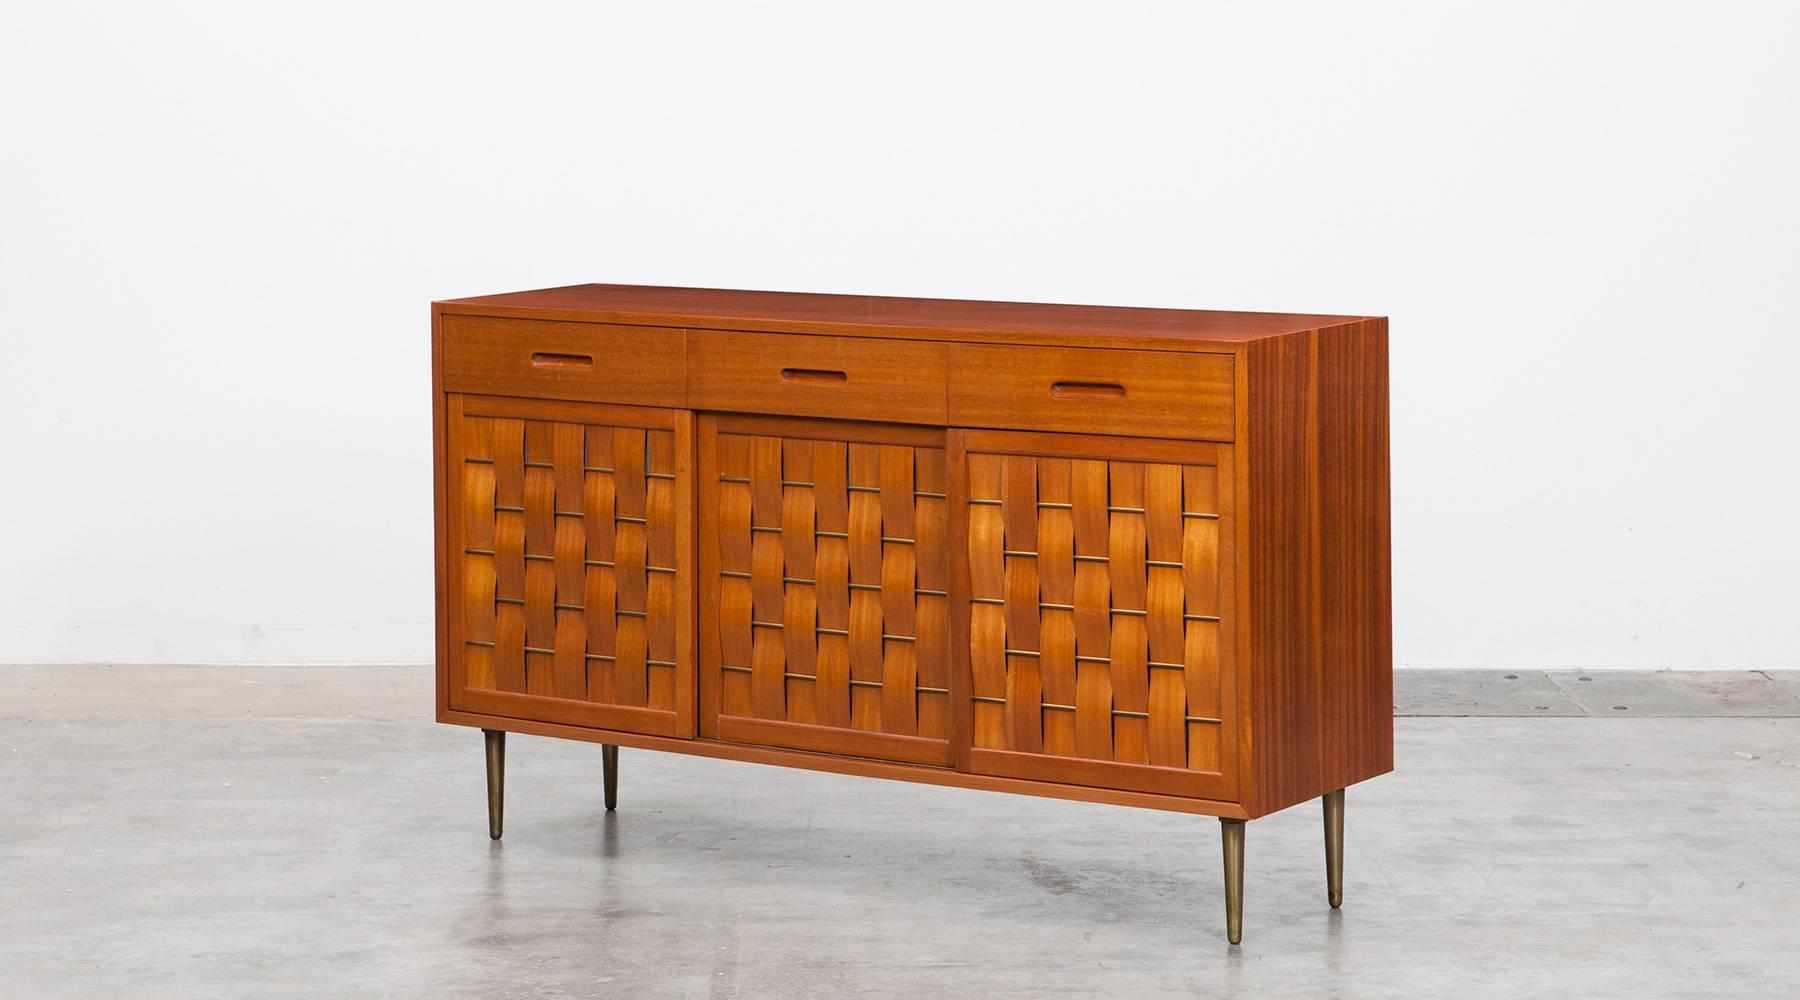 Very rare Edward Wormley sideboard comes in mahogany and a very high quality finish. Three-door credenza comes with mahogany case with brass details on doors and legs. Three woven bleached rosewood sliding doors. Manufactured by Dunbar.

US-designer